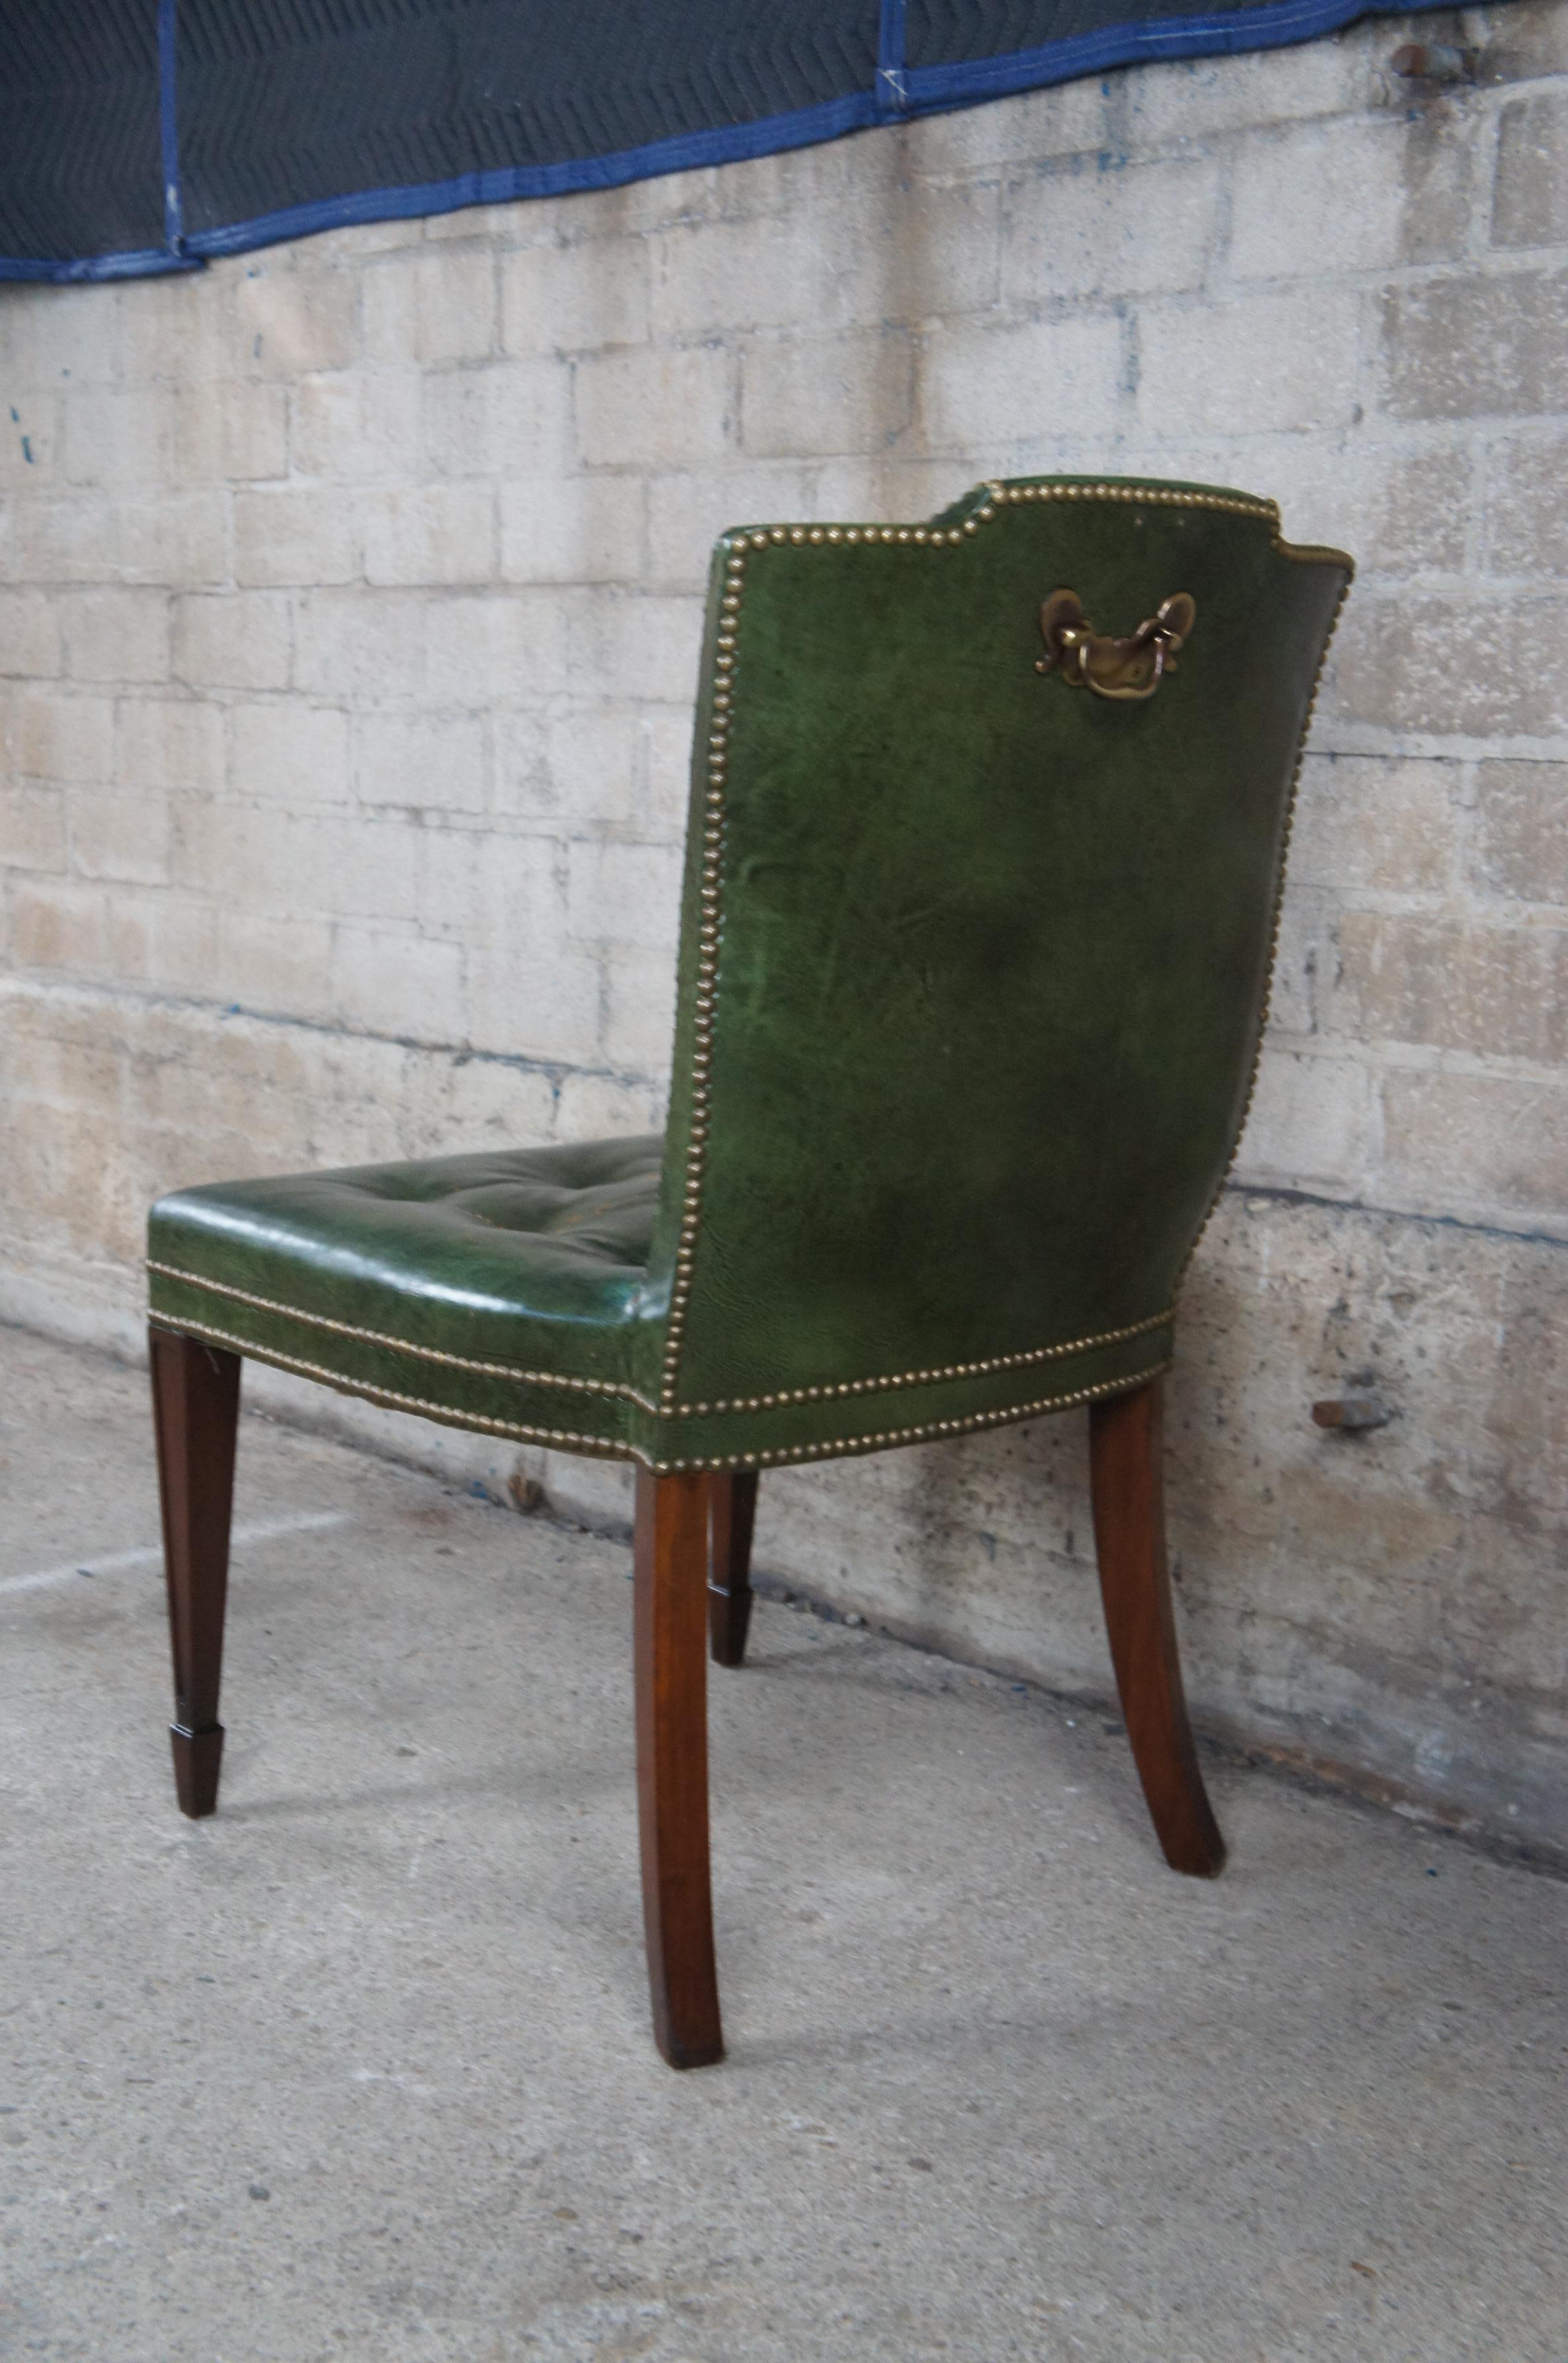 Drexel Heritage Midcentury Sheraton Mahogany Green Leather Tufted Side Chair In Good Condition For Sale In Dayton, OH